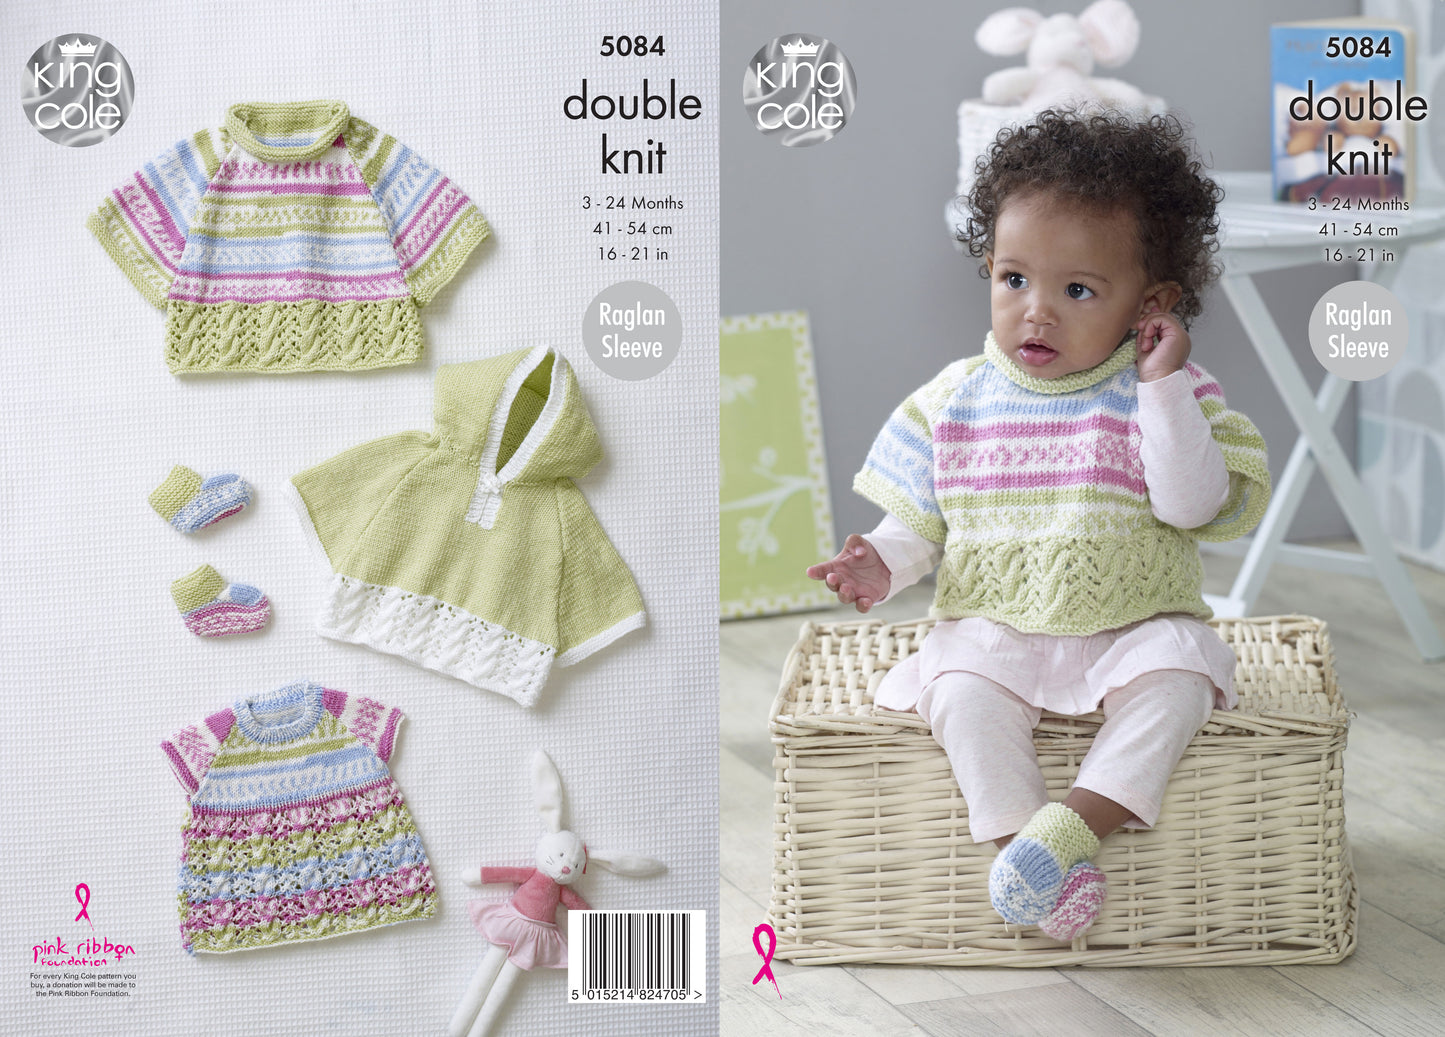 King Cole Cape, Top & Bootees Knitted in Cherish & Cherished DK 5084